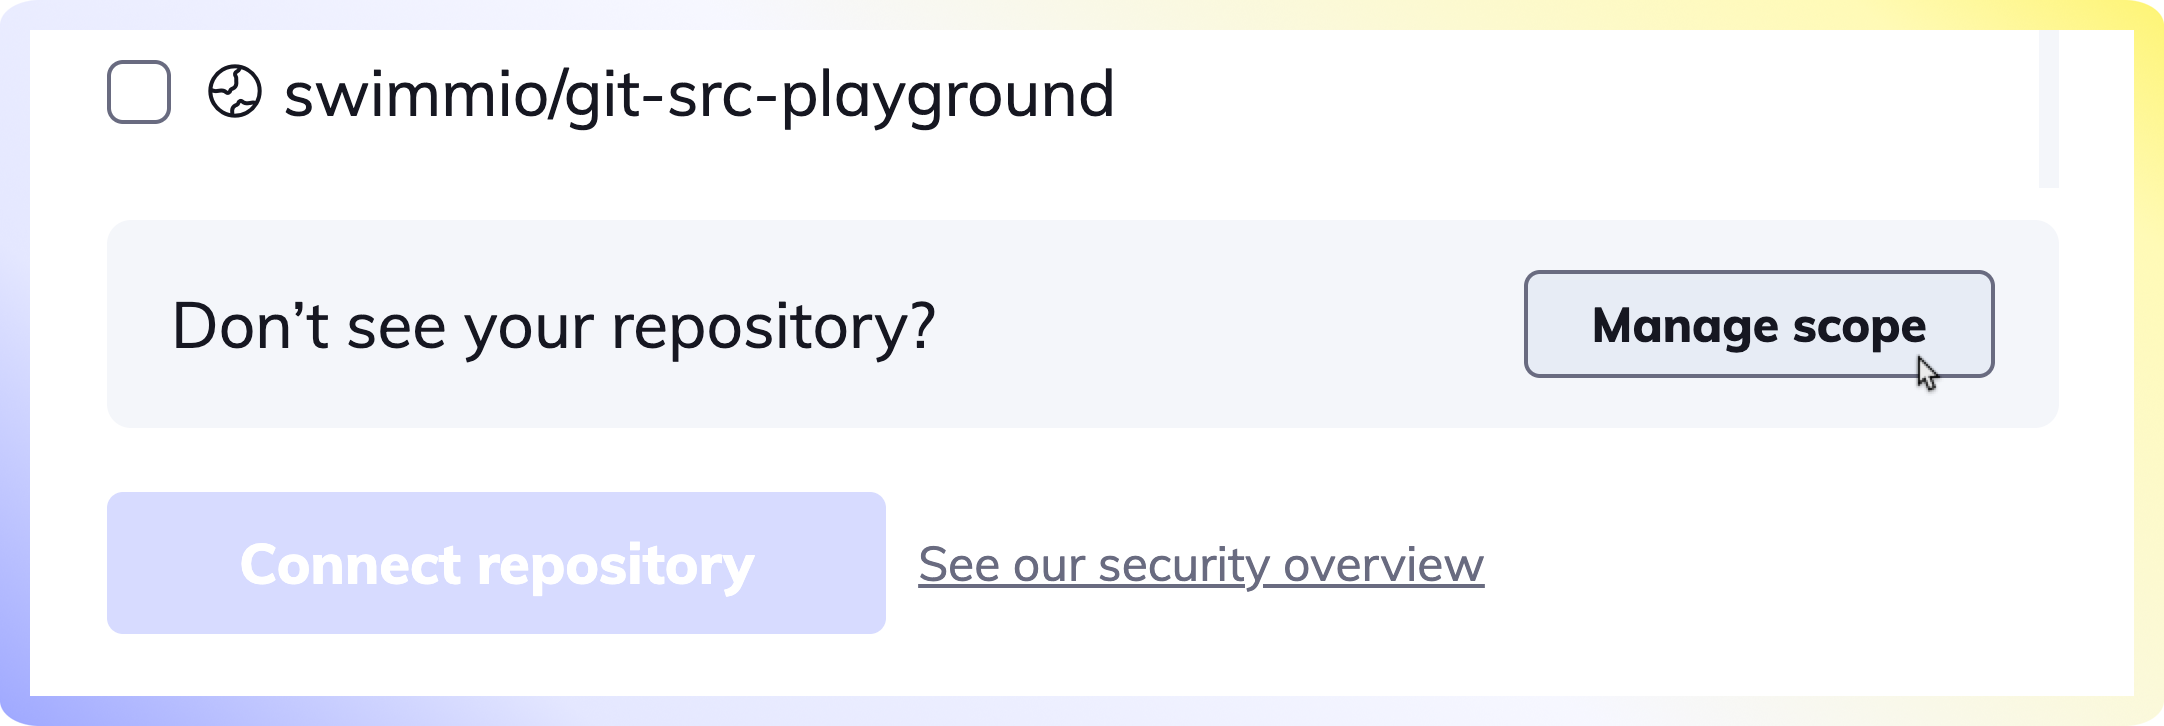 GitHub modal to manage scope of repositories not found